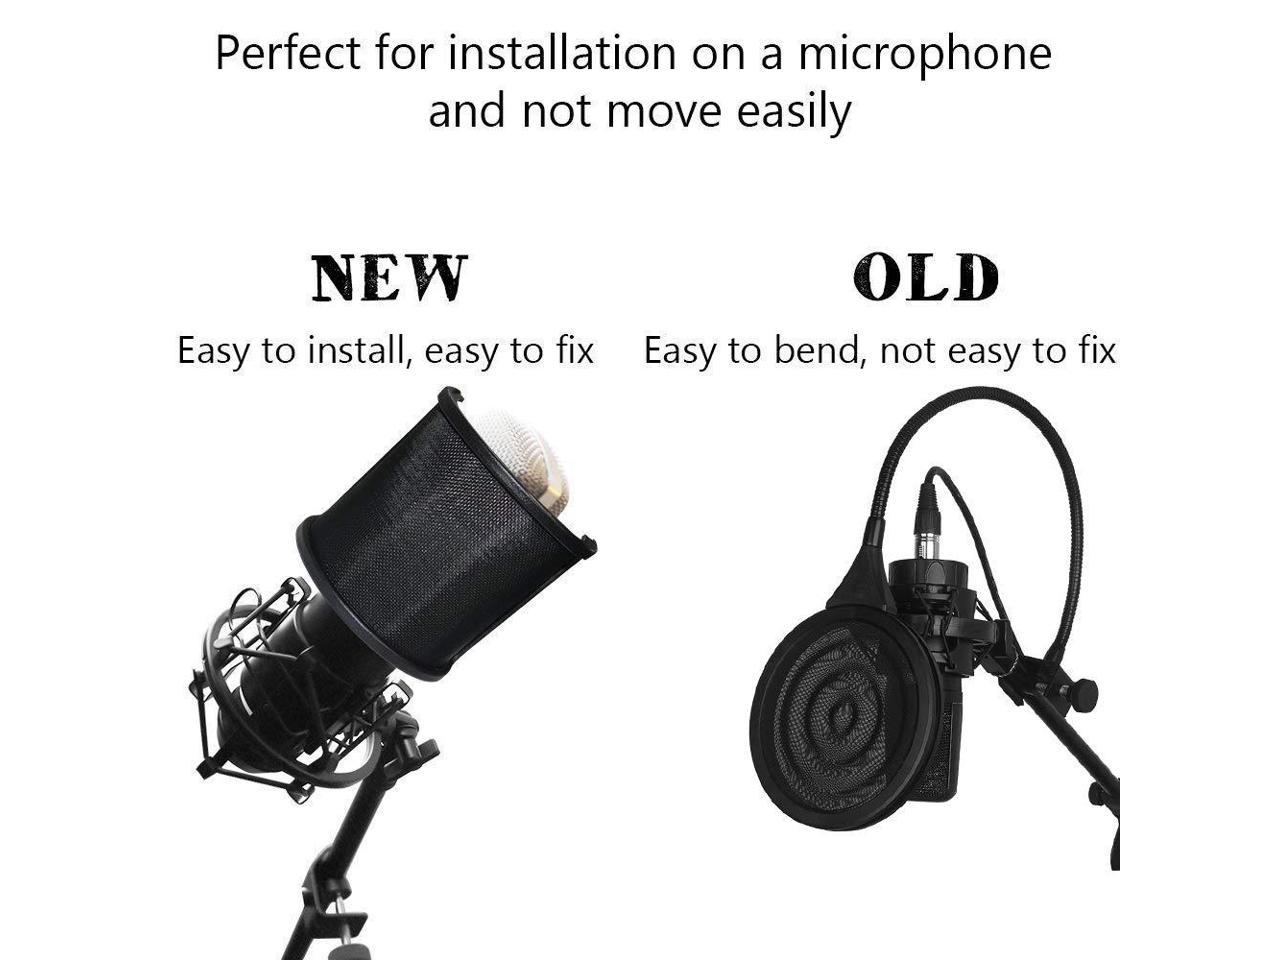 Metal Mesh & Foam & Etamine Layer Microphone Windscreen Cover Handheld Mic Shield Mask Microphone Accessories for Vocal Recording Streaming EJT Three Layers Pop Filter Youtube Videos 